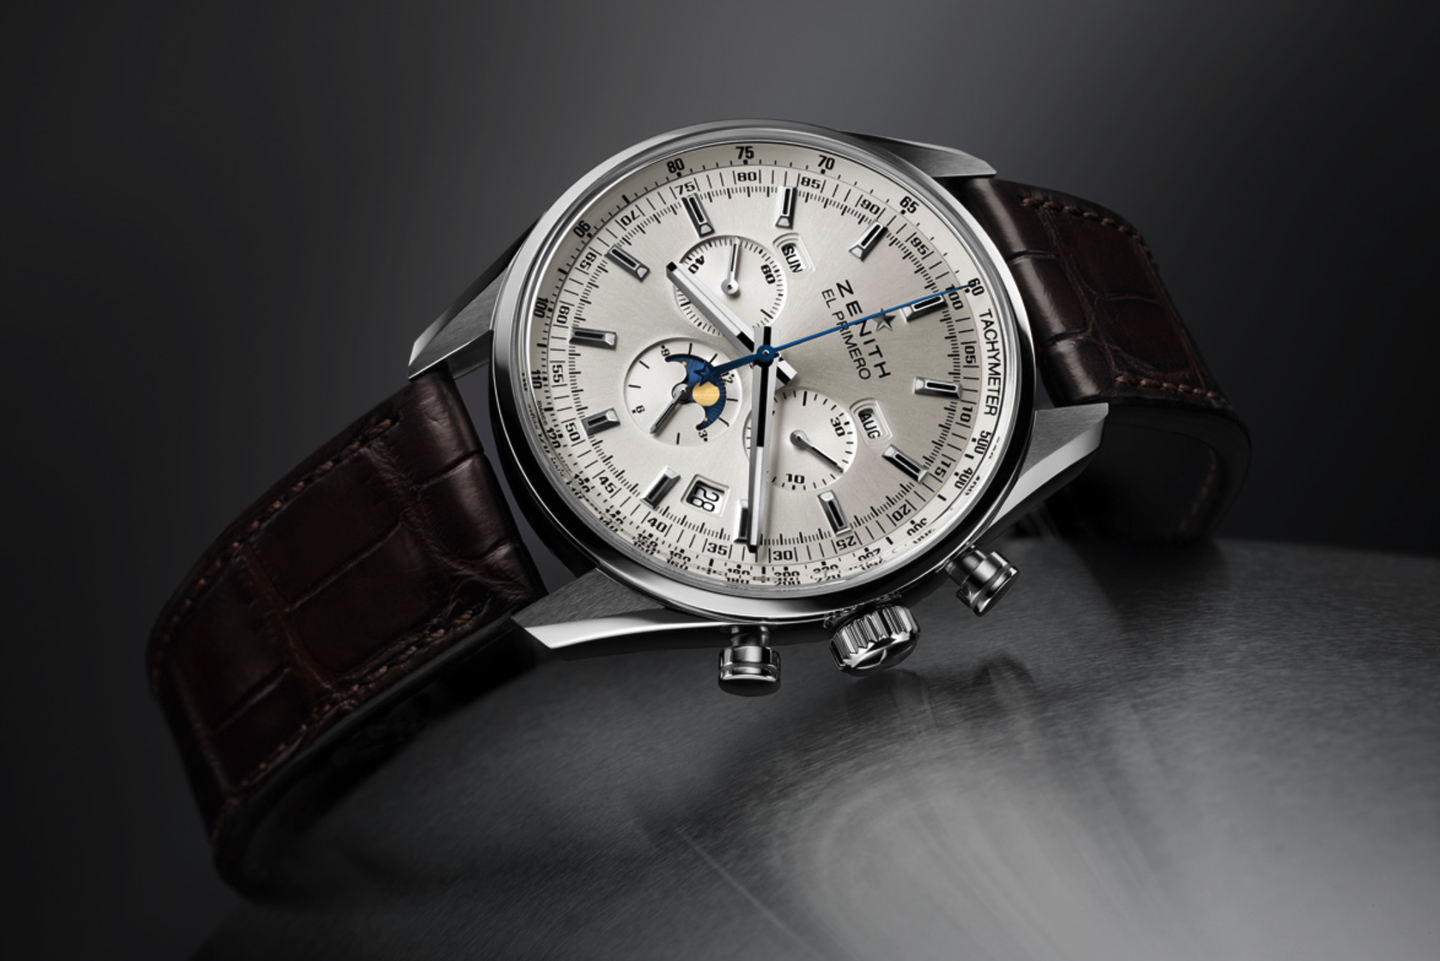 The Zenith El Primero 410 Chronograph with Moonphase and Triple Calendar